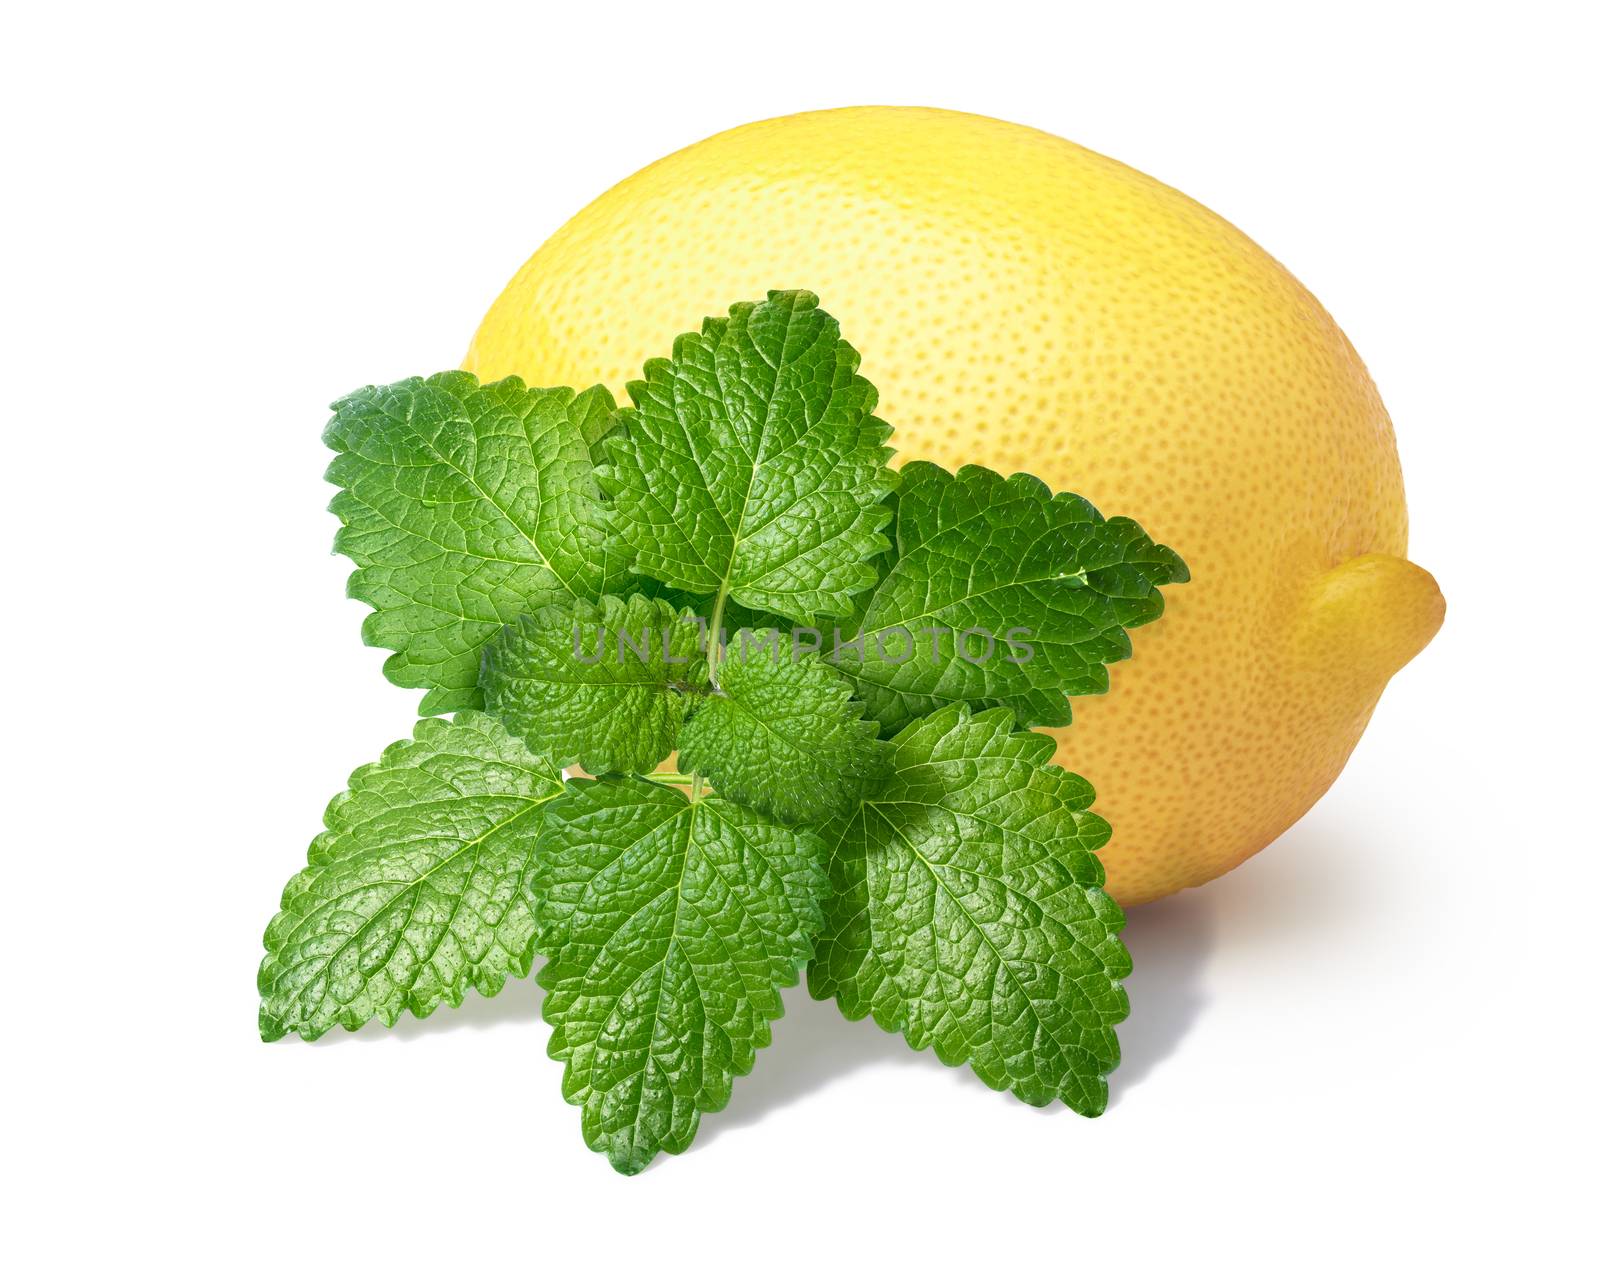 Whole lemon with with  mint balm (Melissa). Clipping paths for composite and for shadows, infinite depth of field